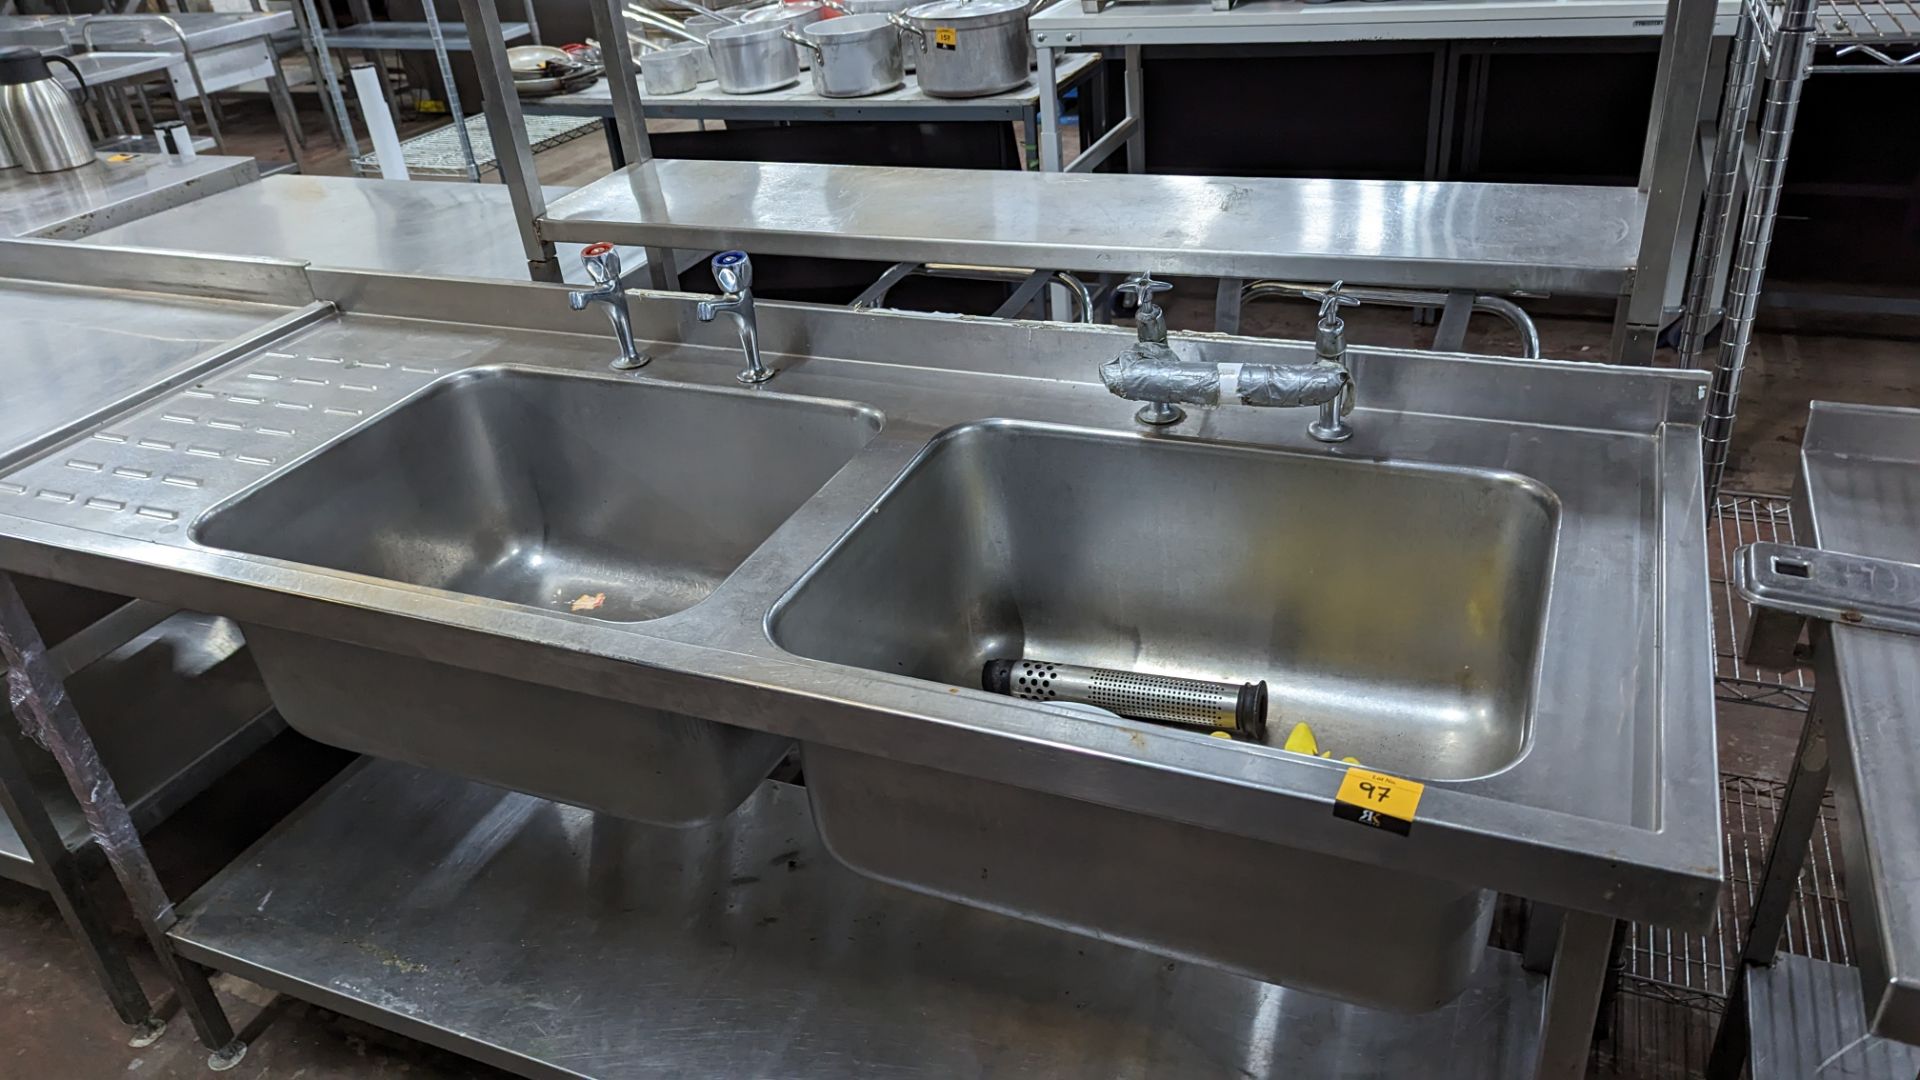 Stainless steel floor standing twin bowl sink arrangement with drainer to the left - Image 3 of 5